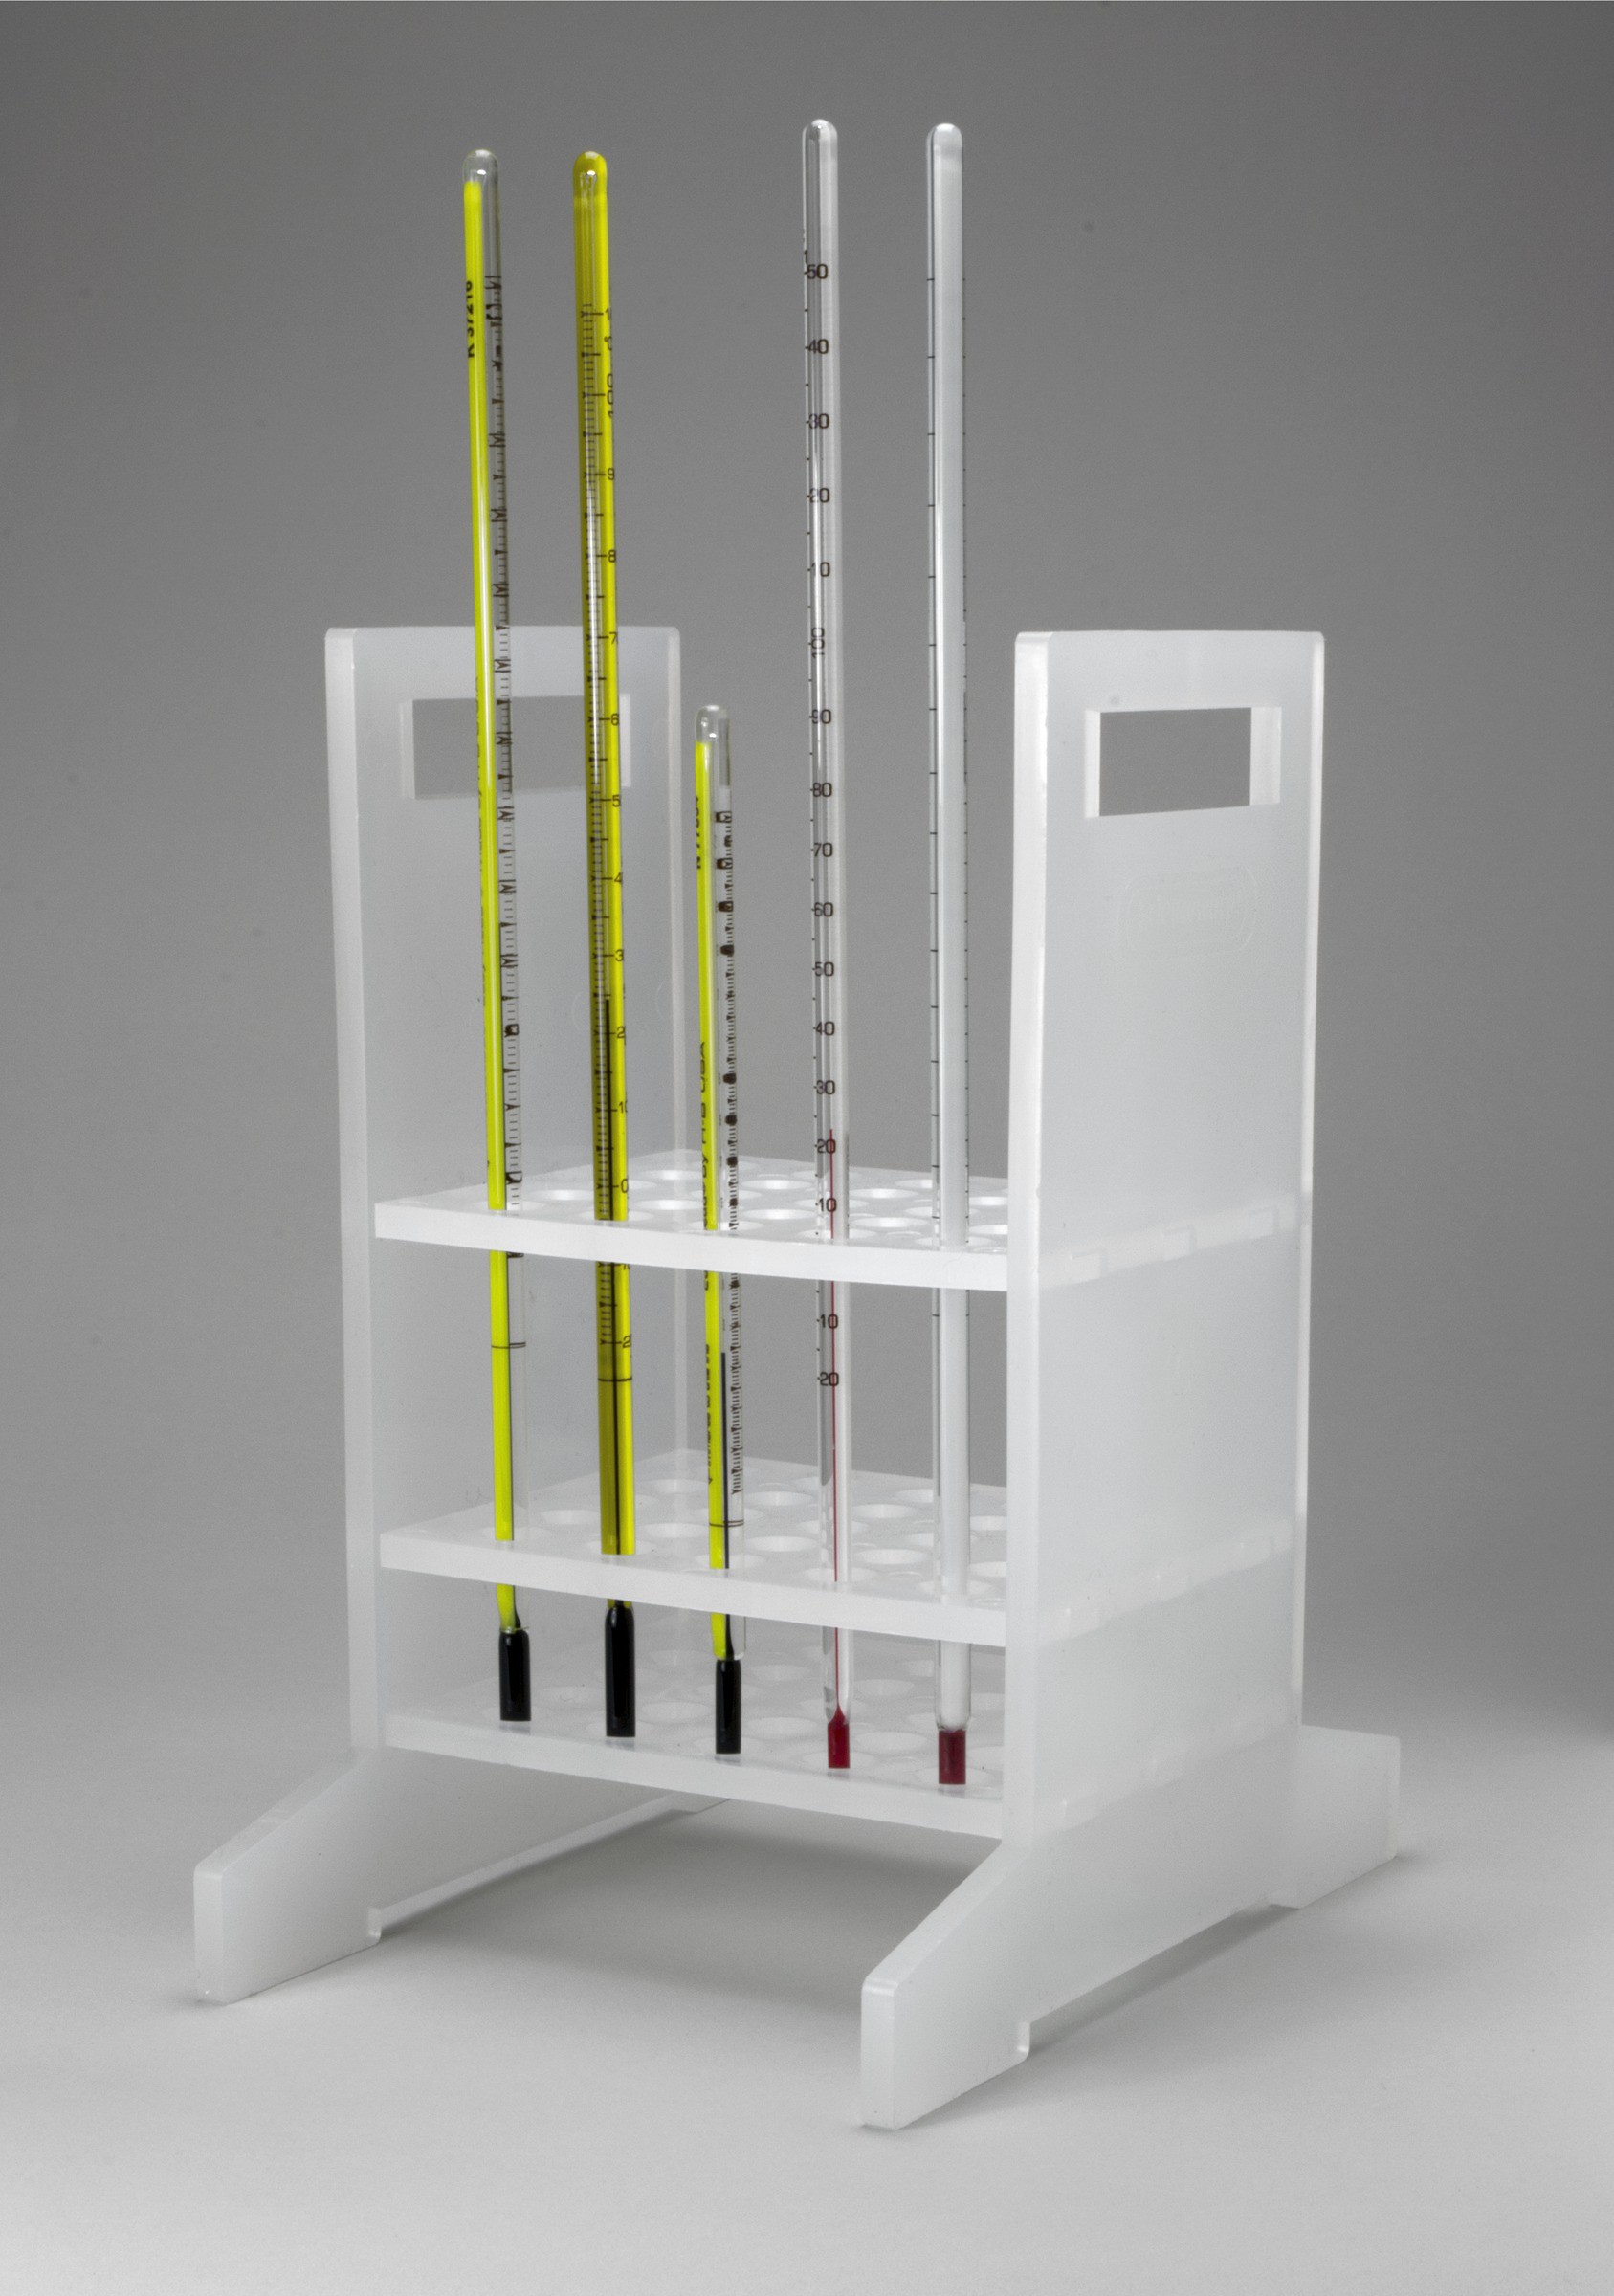 SP Bel-Art Thermometer Rack; 25 Places, 5⁷/₈ x 8³/₈ x 9⁷/₈ in., Polypropylene